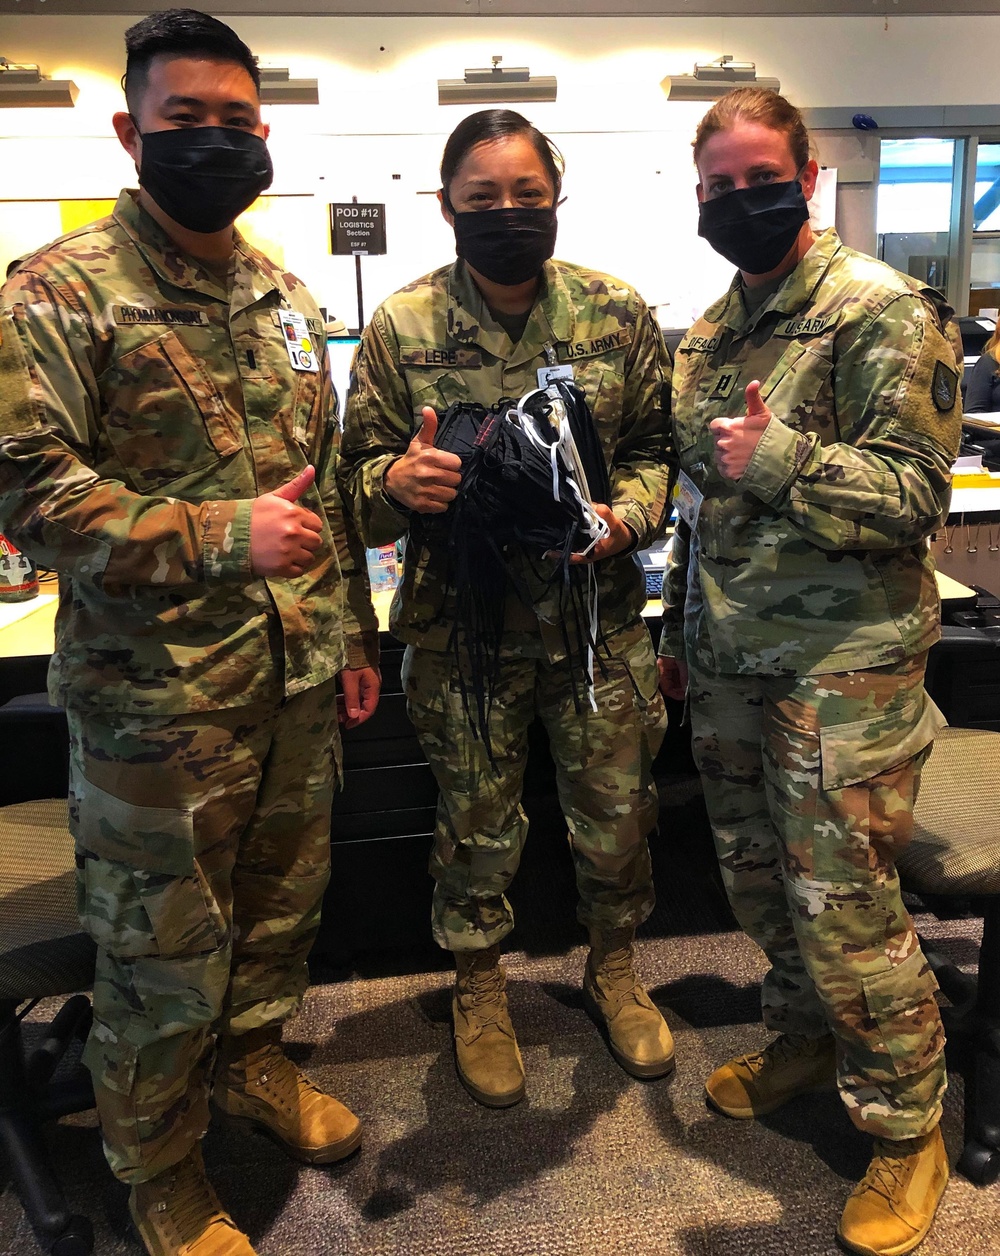 Donated masks help Guard members complete their COVID-19 missions